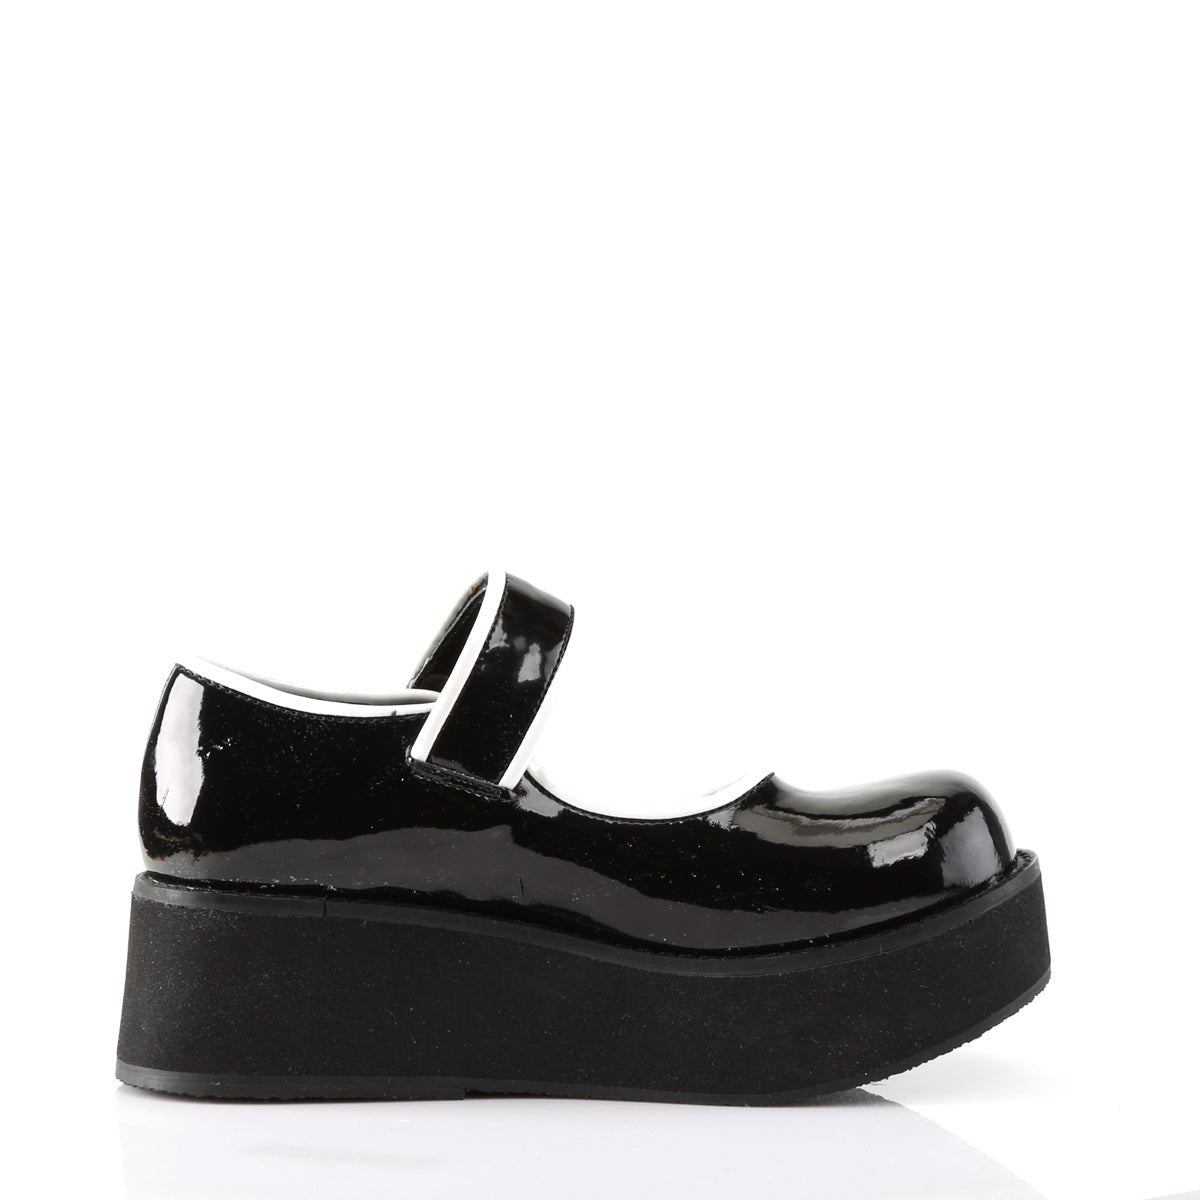 Too Fast | Demonia Sprite 01 | Black Patent Leather Women's Mary Janes